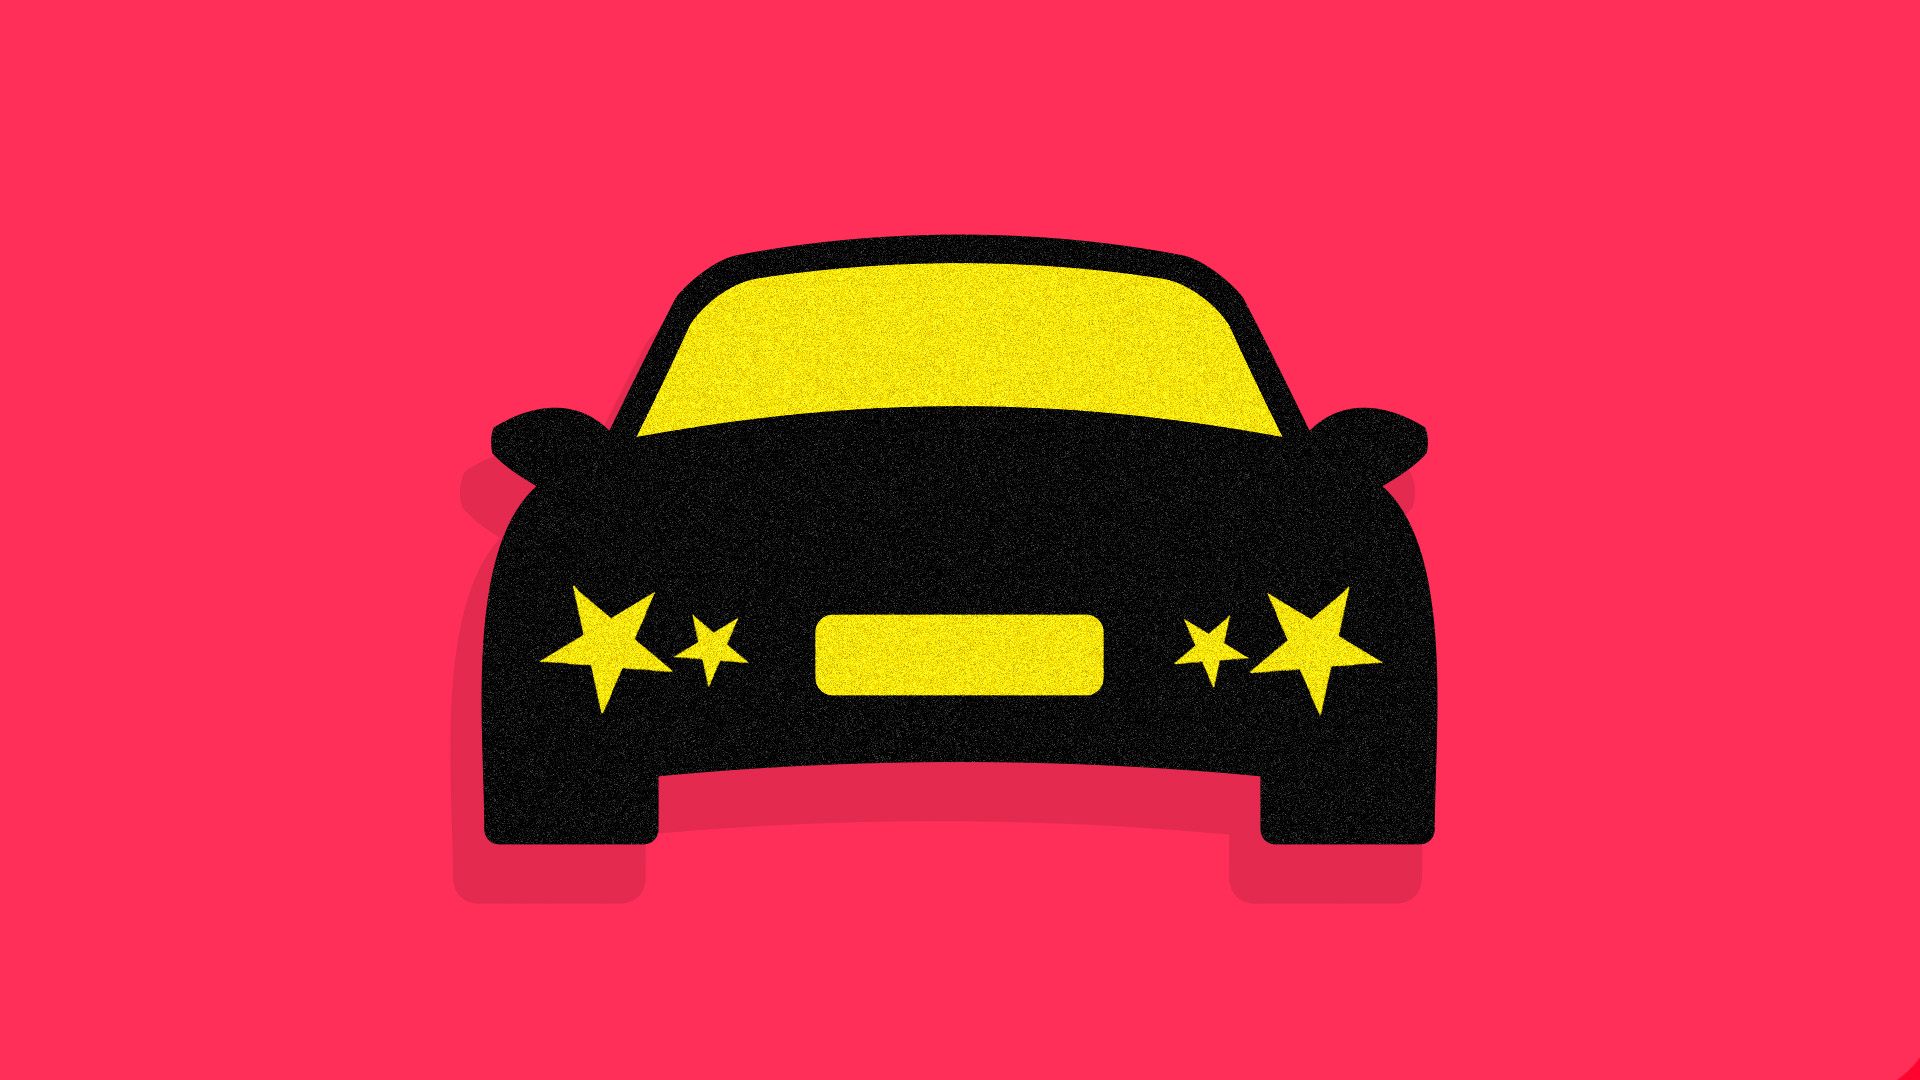 Illustration of a car with stars instead of headlights